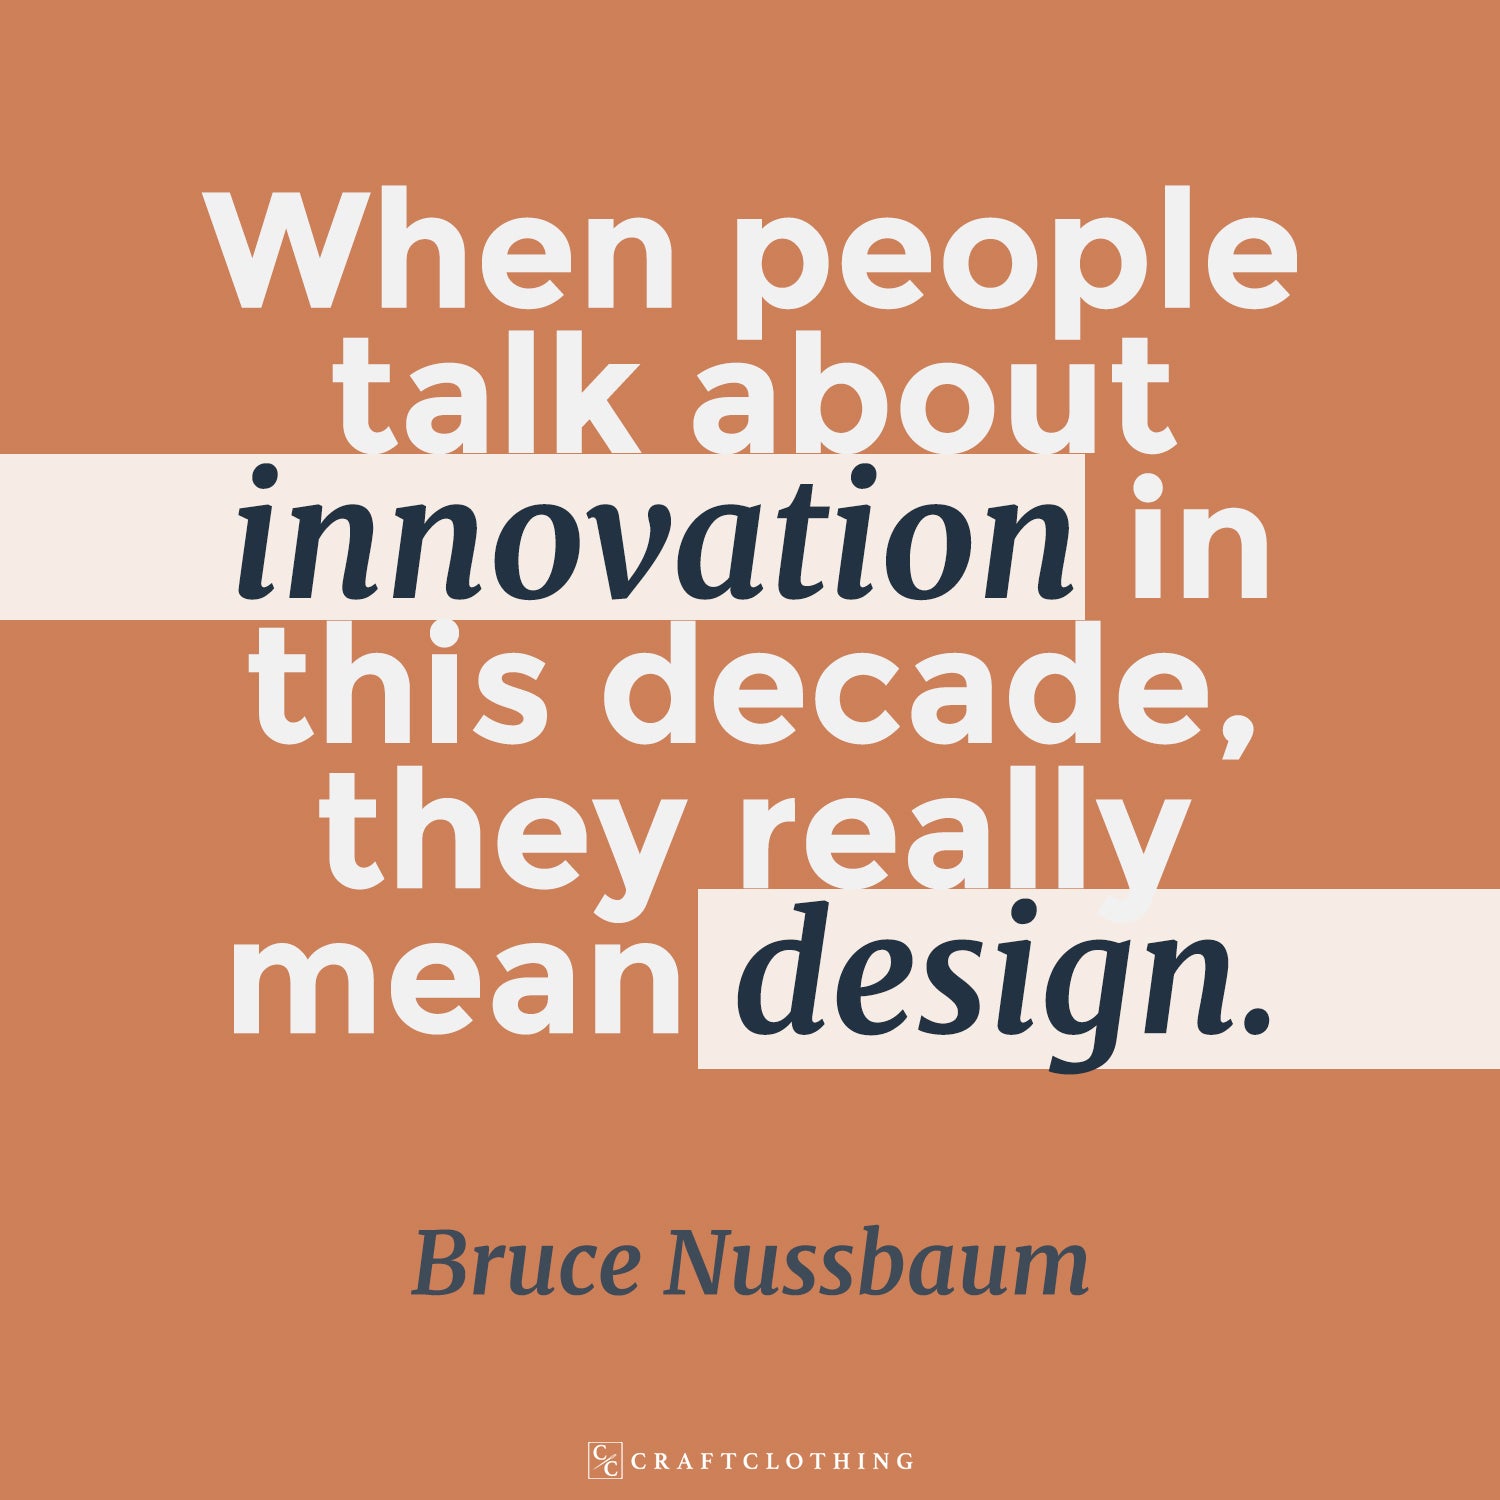 When people talk about innovation in this decade, they really mean design.